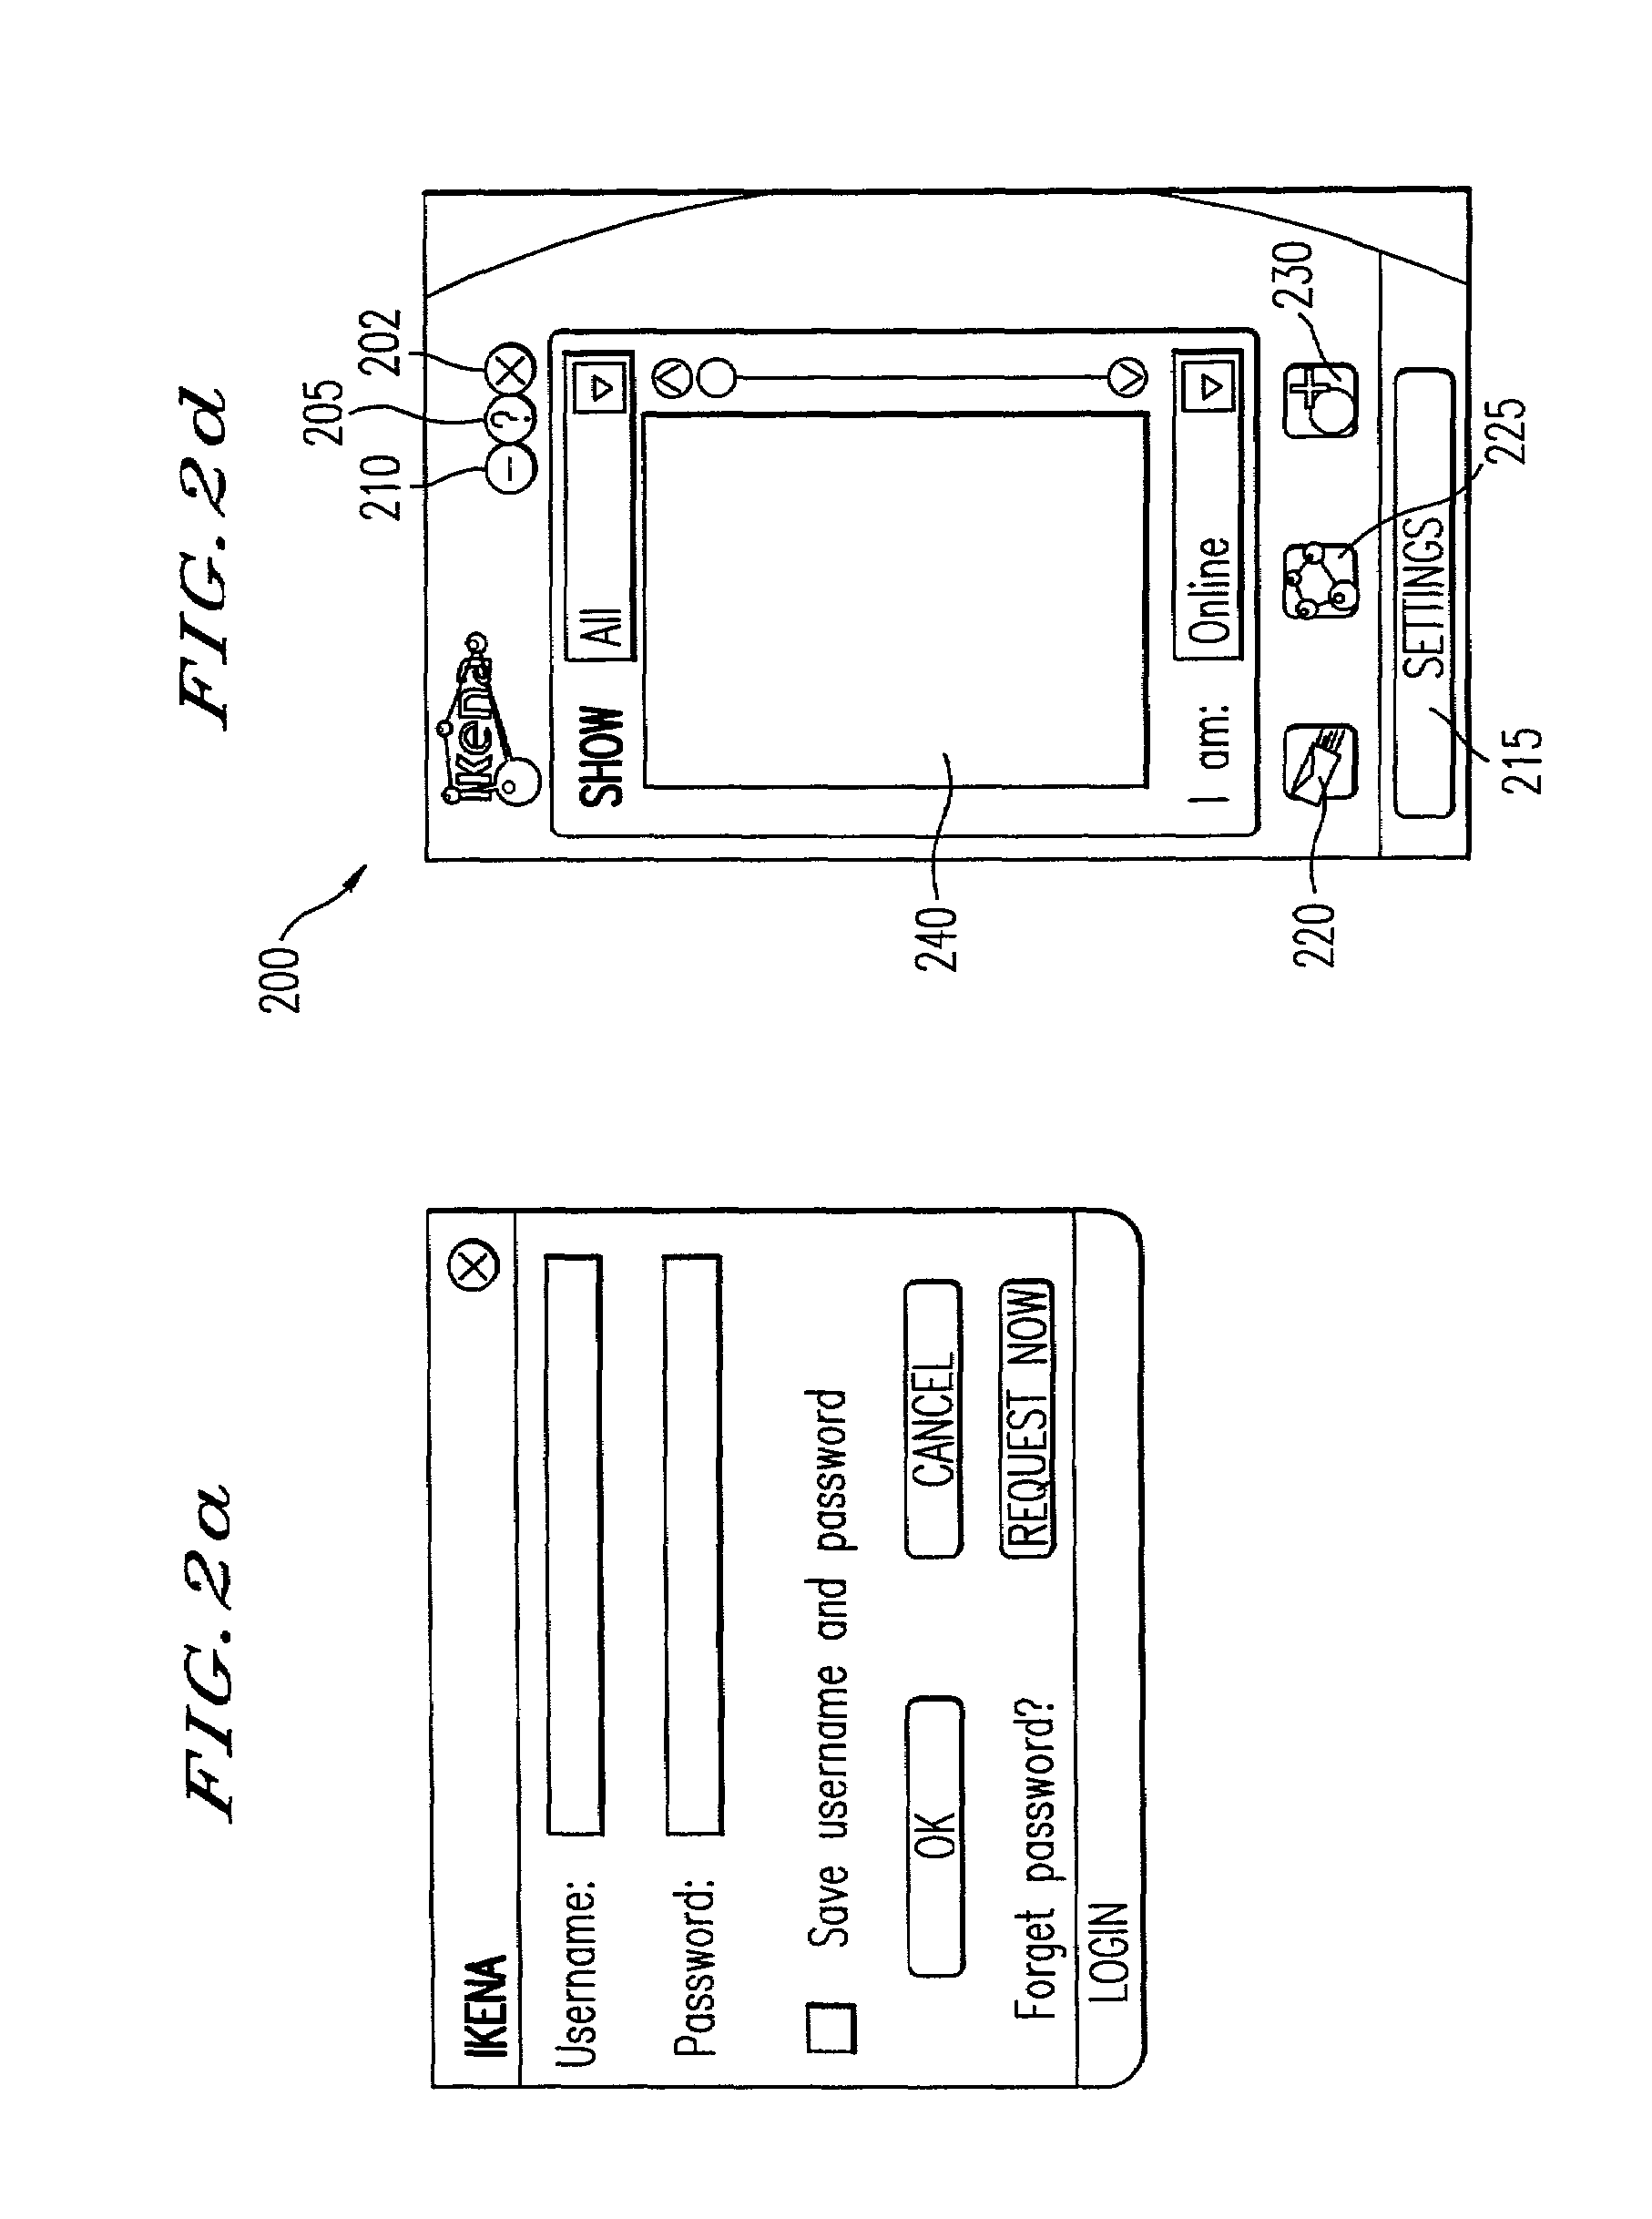 System for enabling multiple clients to interact together over a network with a secure web page